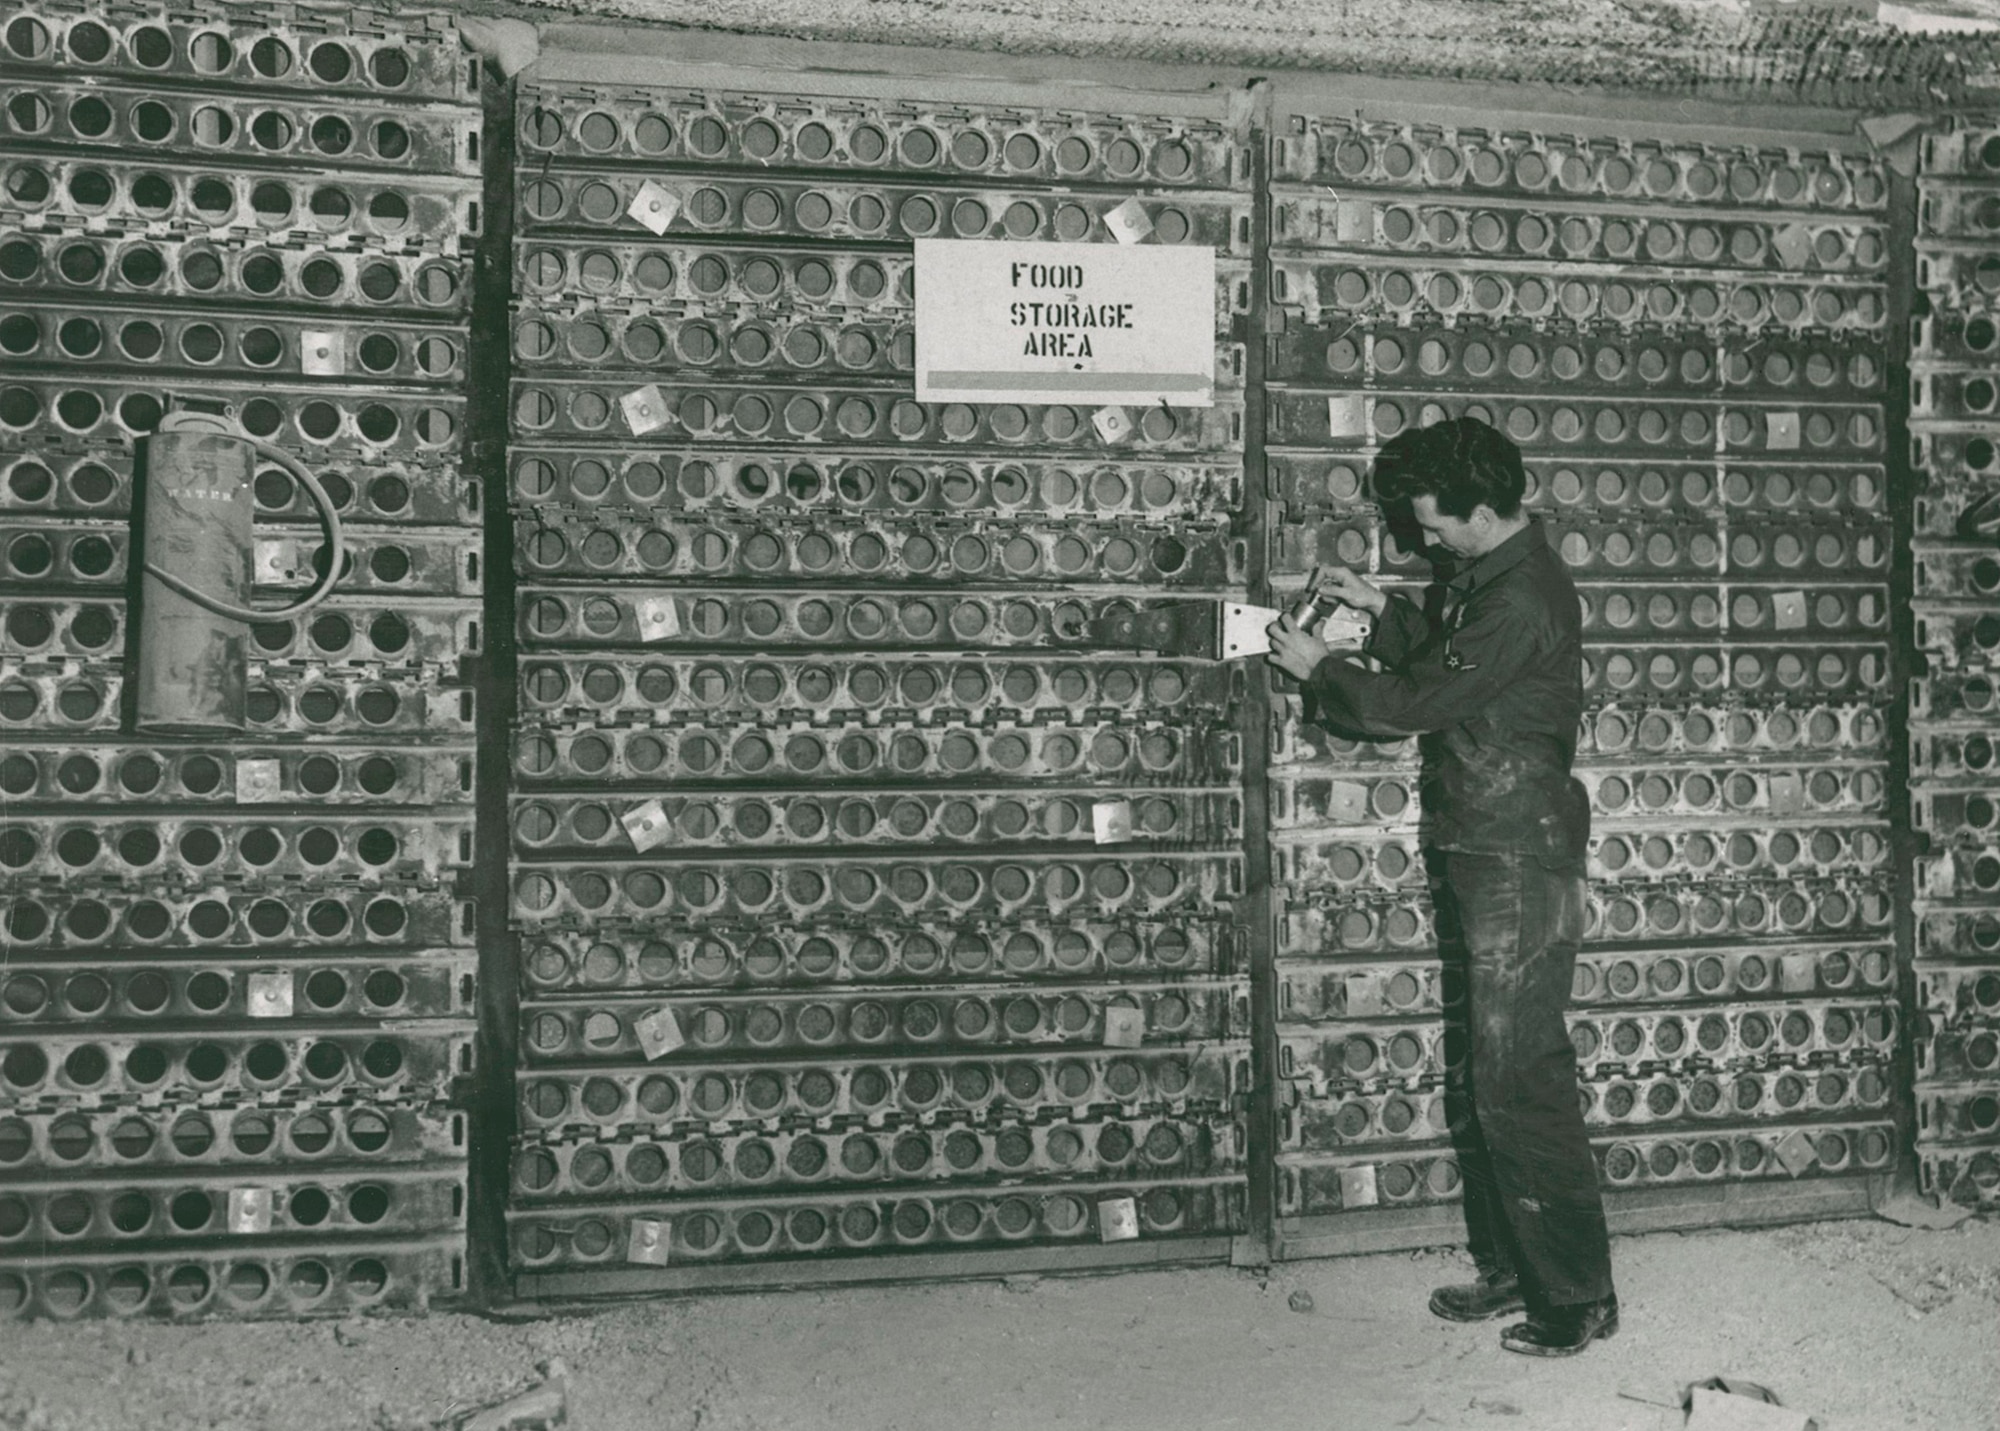 A volunteer checks the food supply in the community fallout shelter in the Borax Mine. The shelter was assembled in 1962 in response to escalating tensions between the United States and Soviet Union. Although the shelter was able to accommodate 17,000 people, fortunately it never had to be used. (Courtesy Photo)